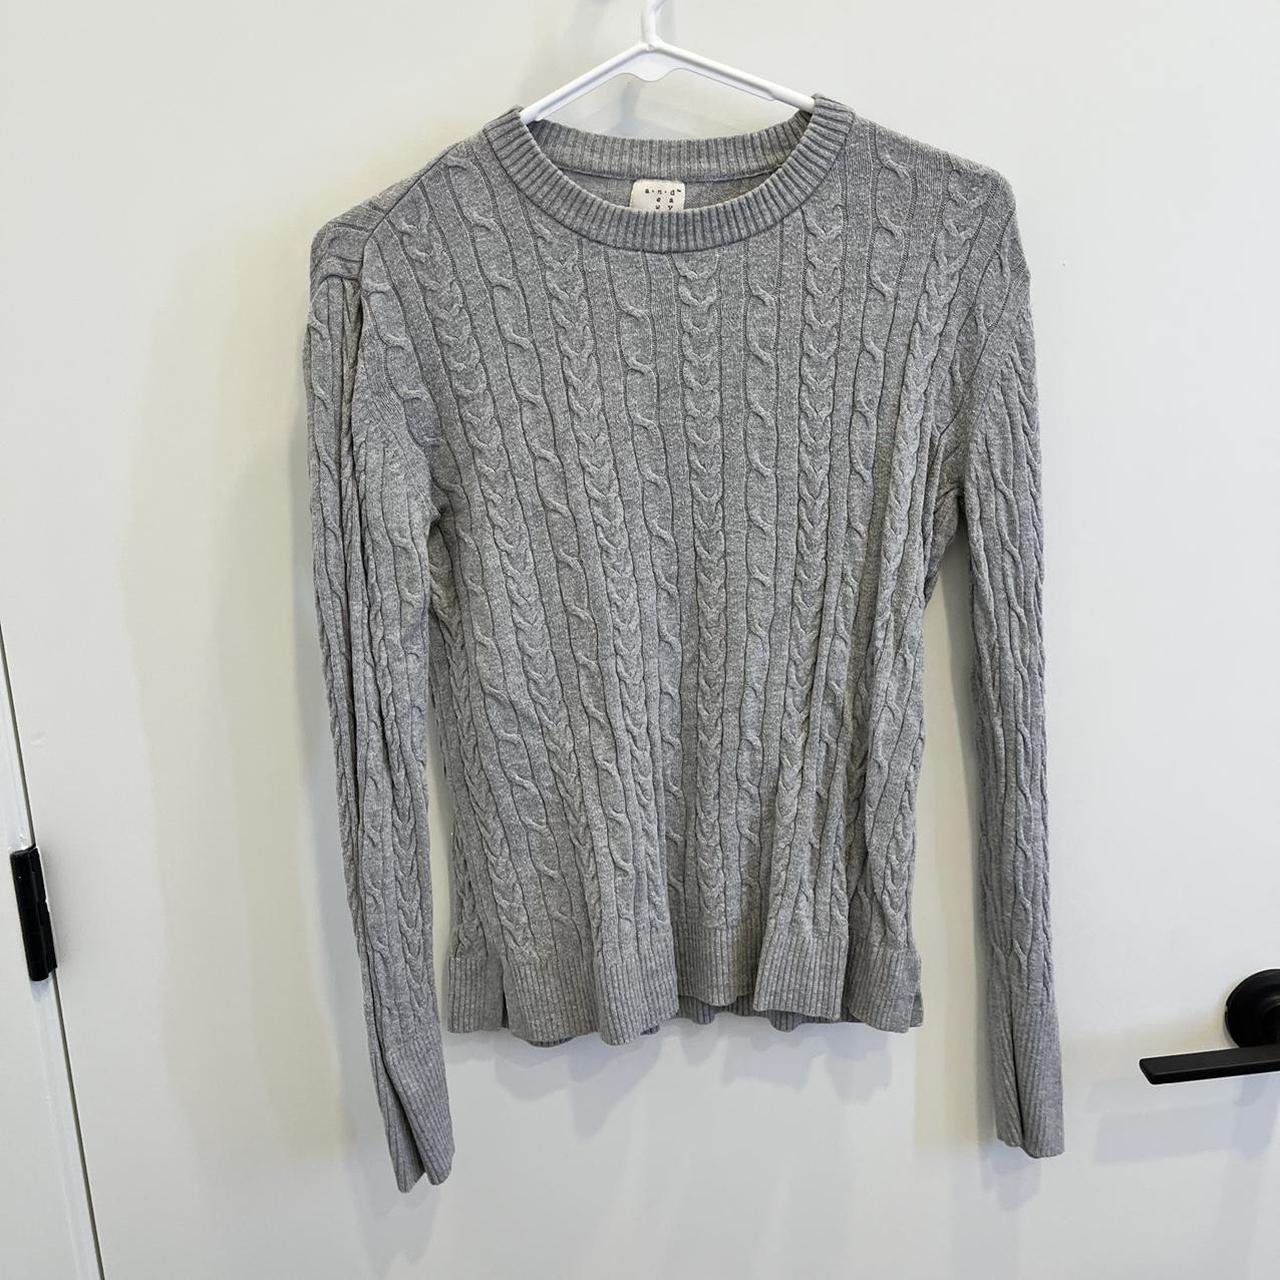 Product Image 1 - Cable knit fitted gray sweater